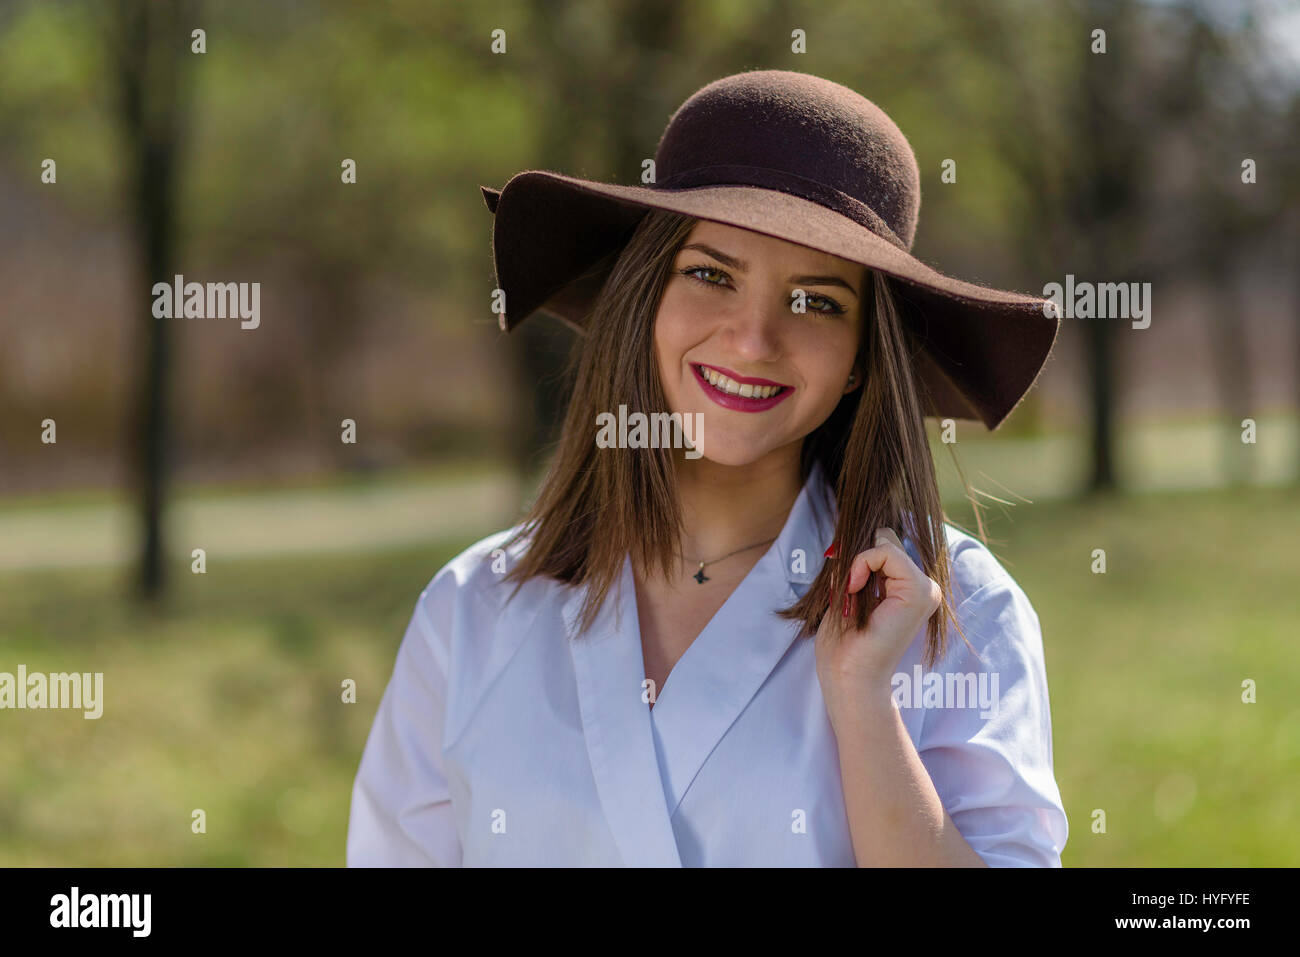 Portrait of a smiling young woman wearing a hat in a park during spring. Woman bowed her head head to the right side of frame. Medium shot. Shallow de Stock Photo